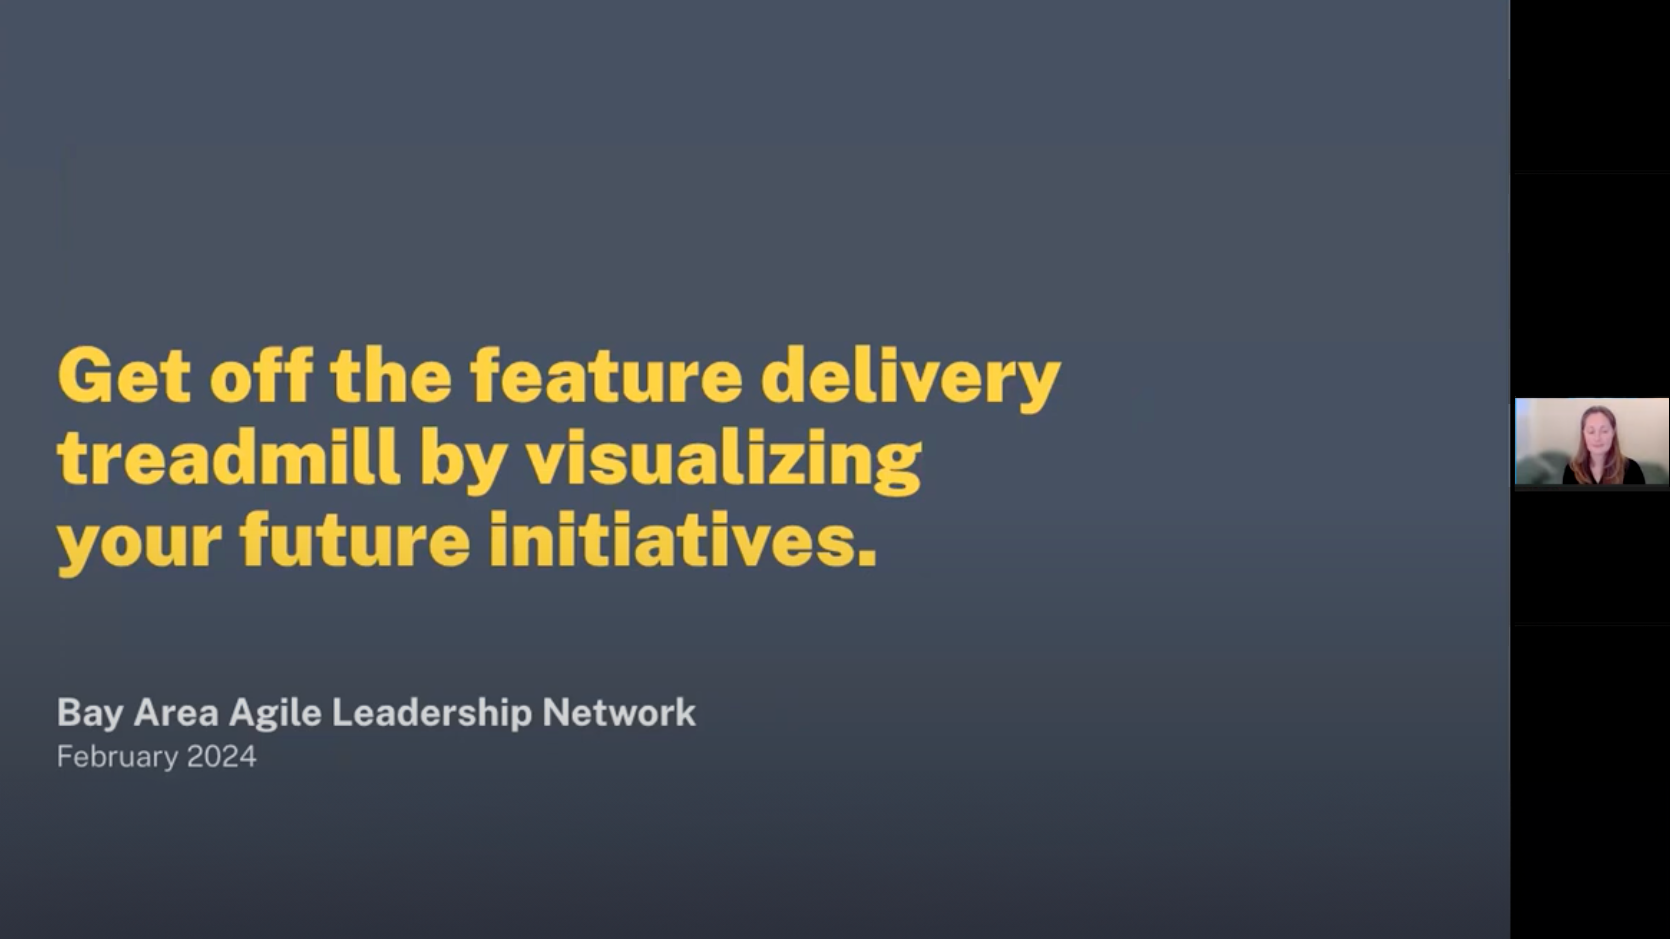 Get off the feature delivery treadmill by visualizing your future initiatives